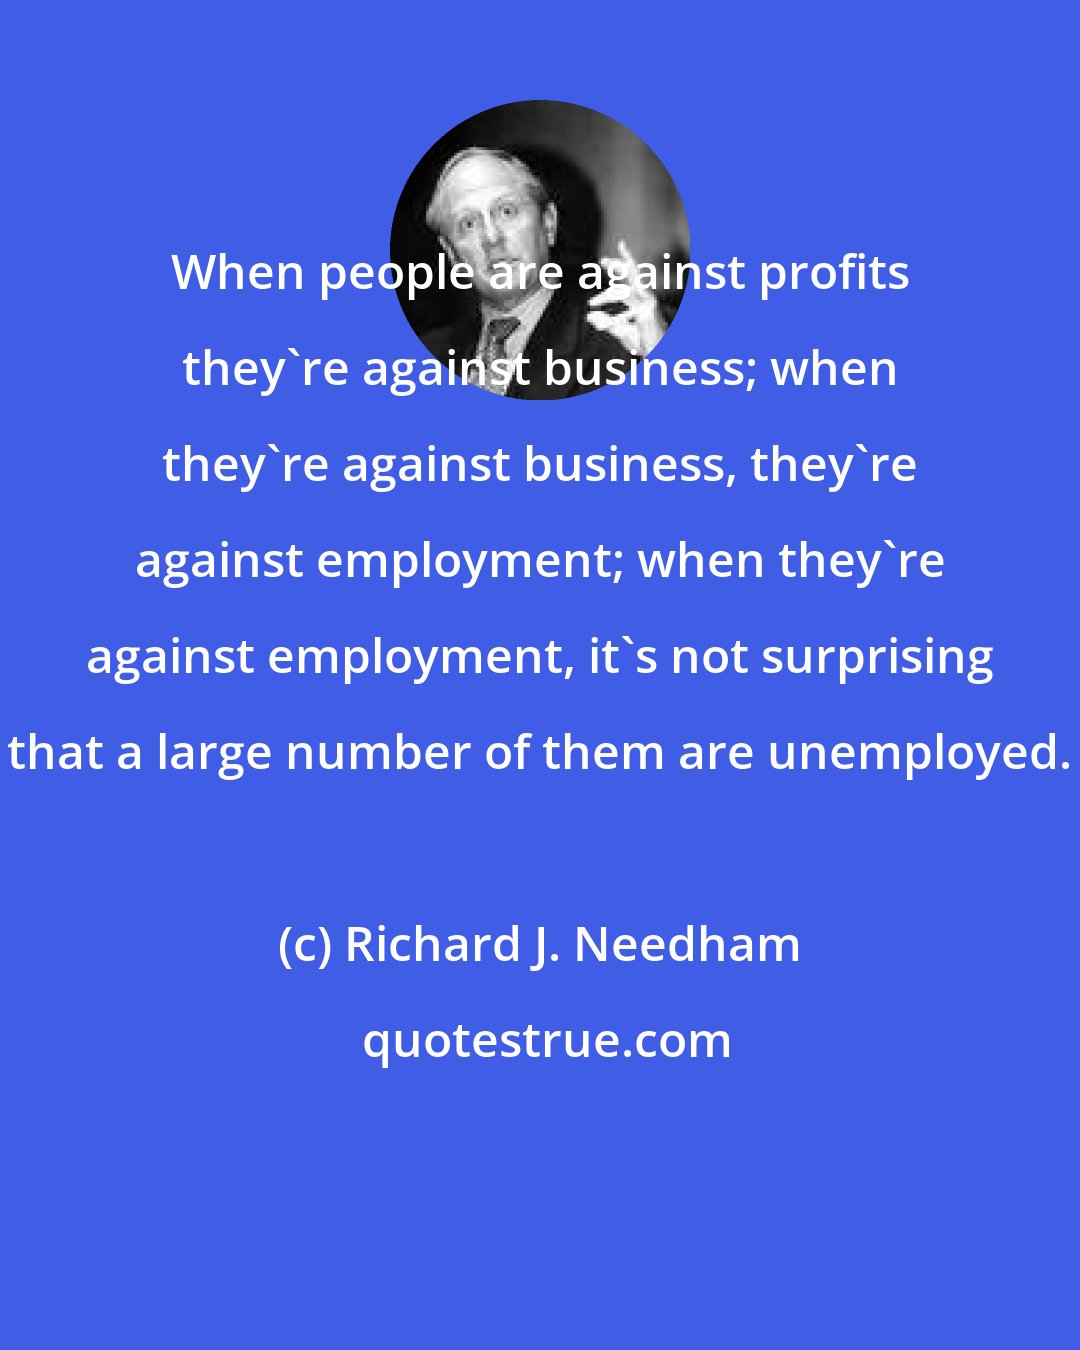 Richard J. Needham: When people are against profits they're against business; when they're against business, they're against employment; when they're against employment, it's not surprising that a large number of them are unemployed.